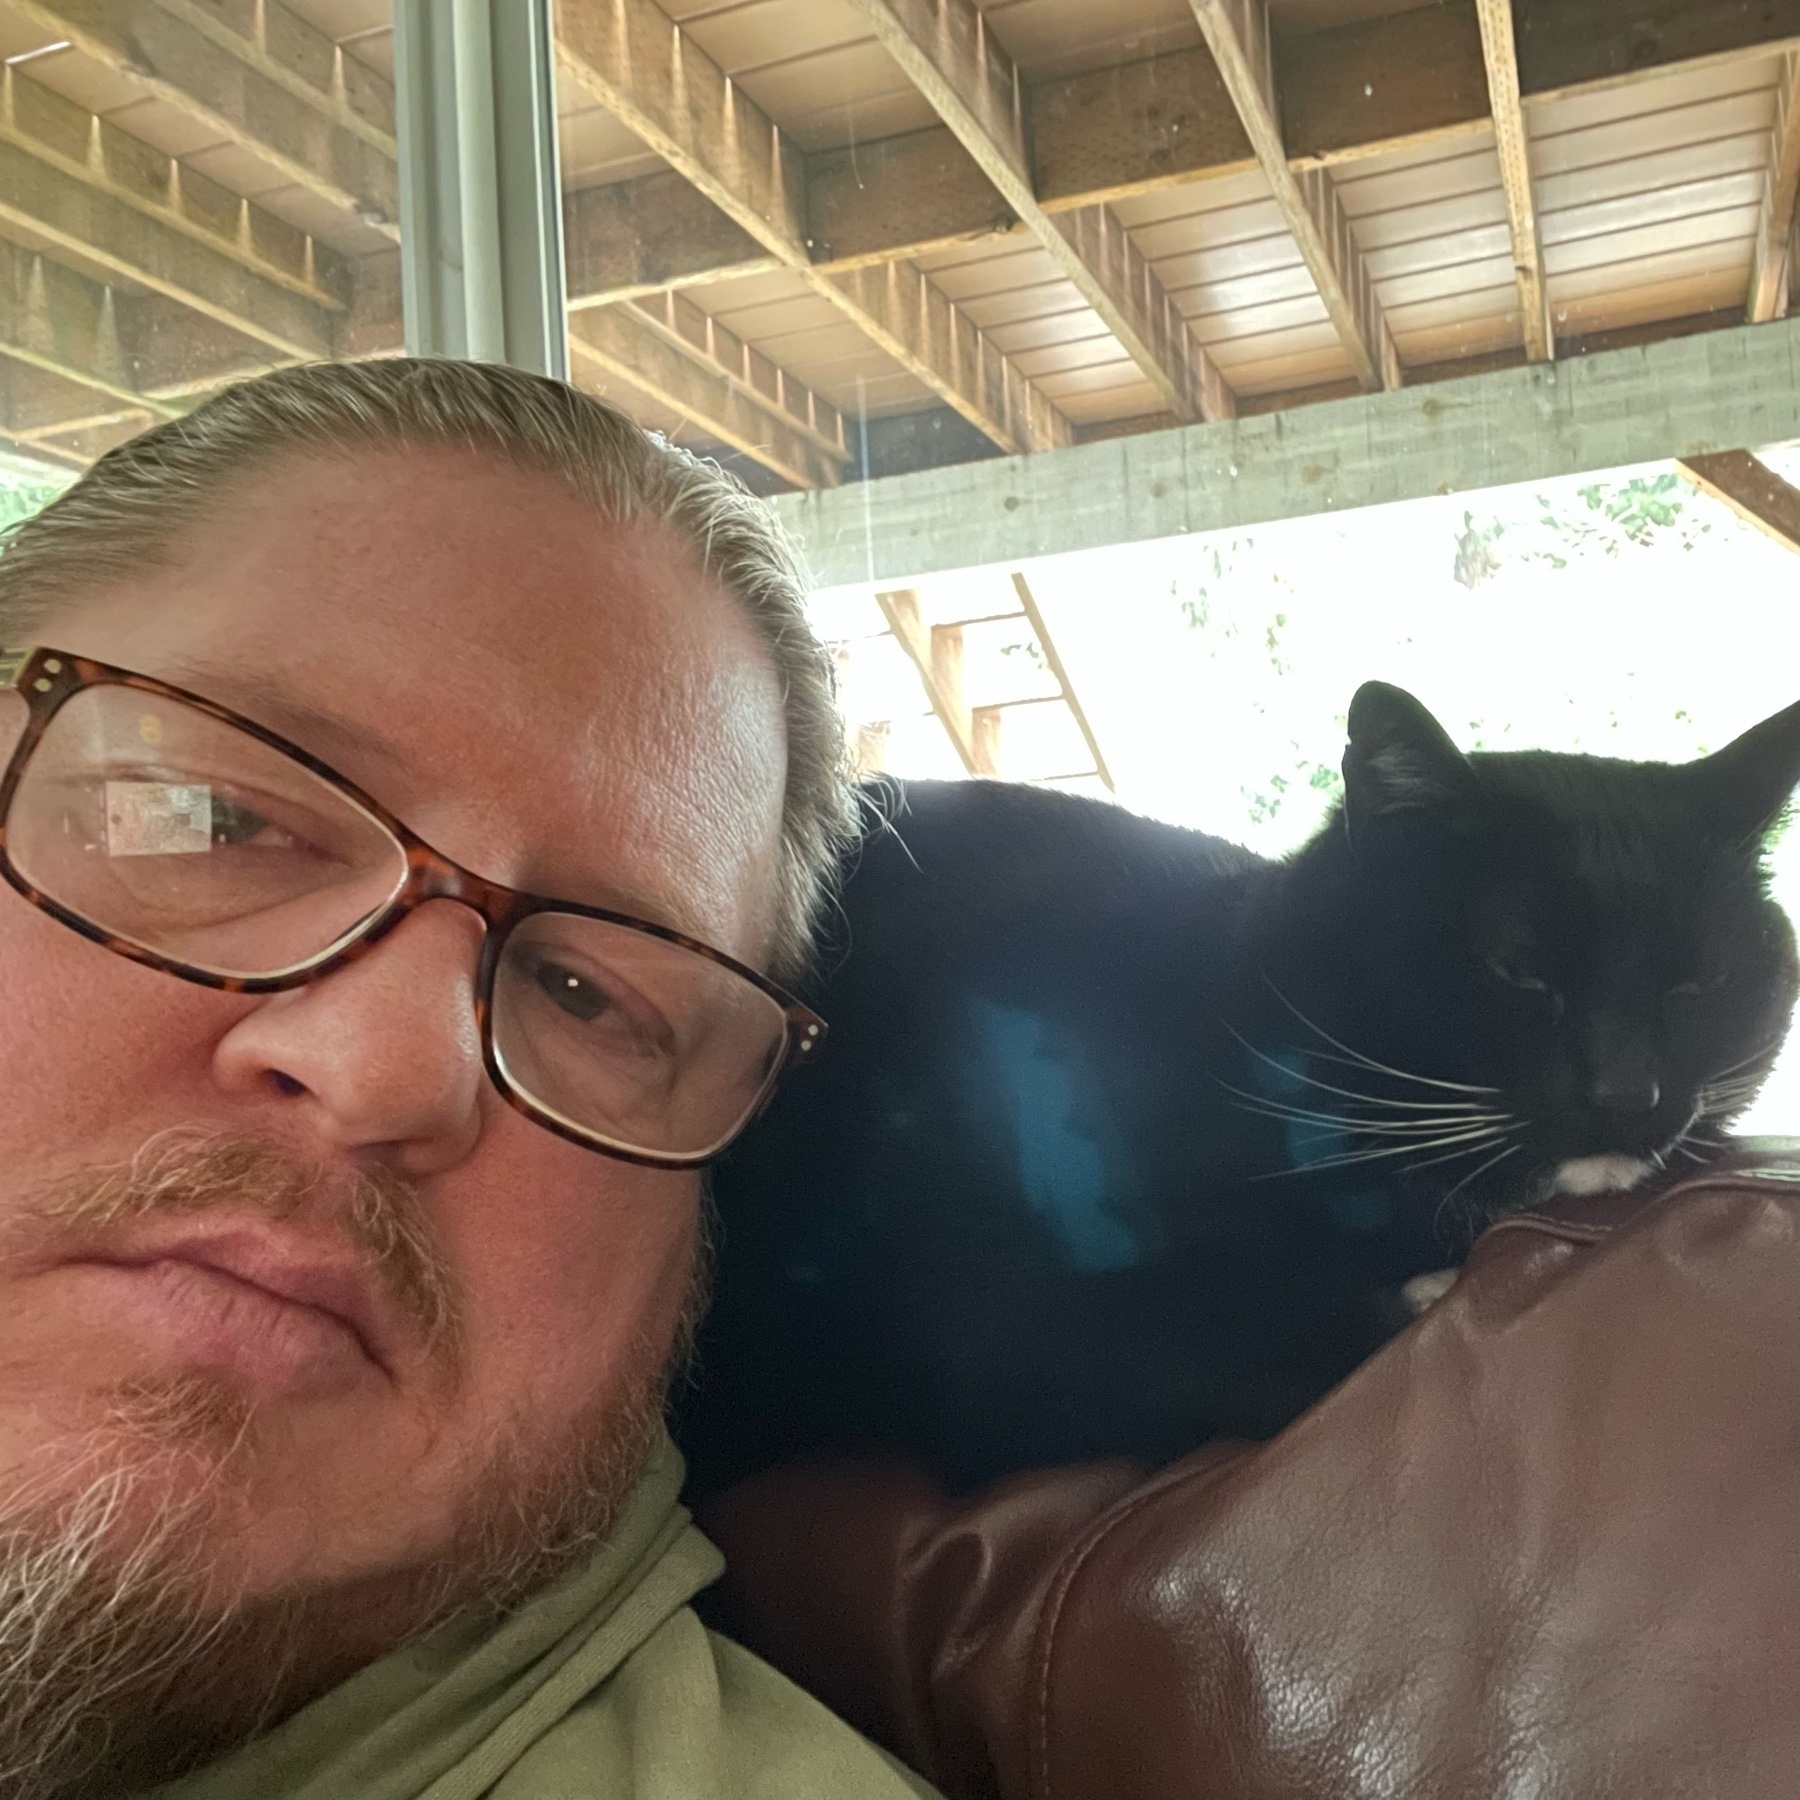 Selfie of me leaning up against our black tuxedo cat on the back of the armchair